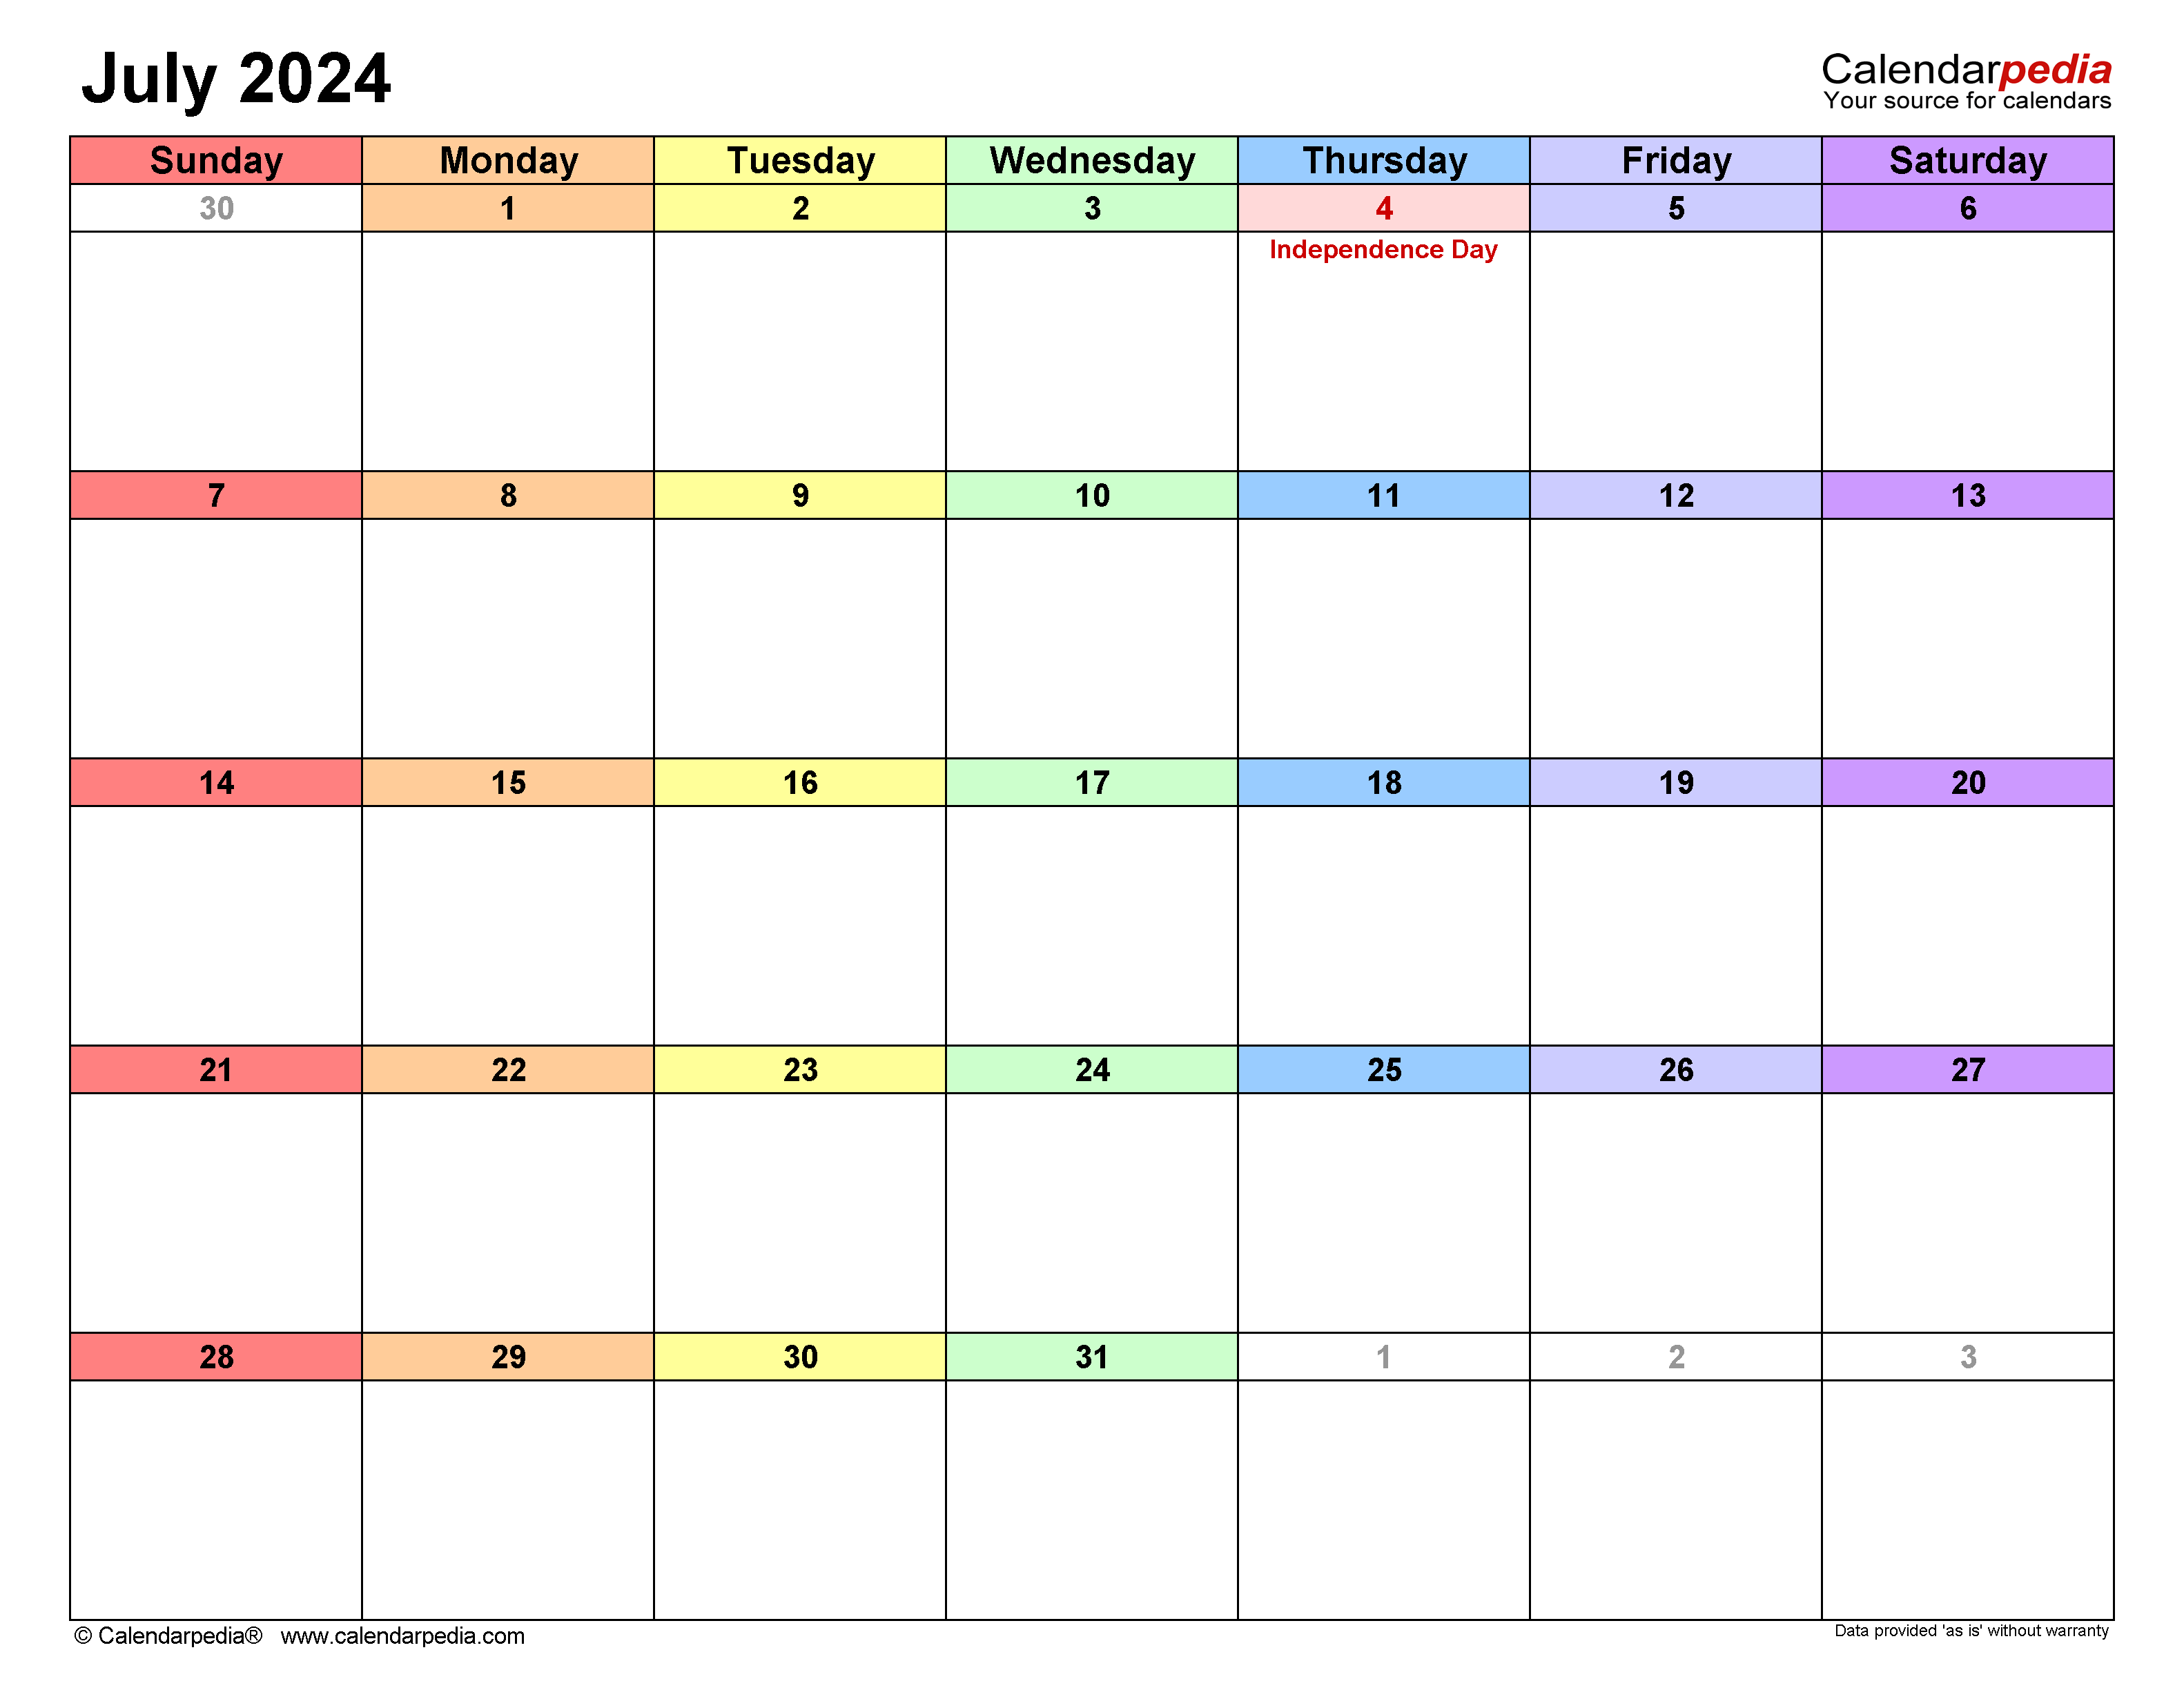 July 2024 Calendar | Templates For Word, Excel And Pdf with July 2024 Editable Calendar